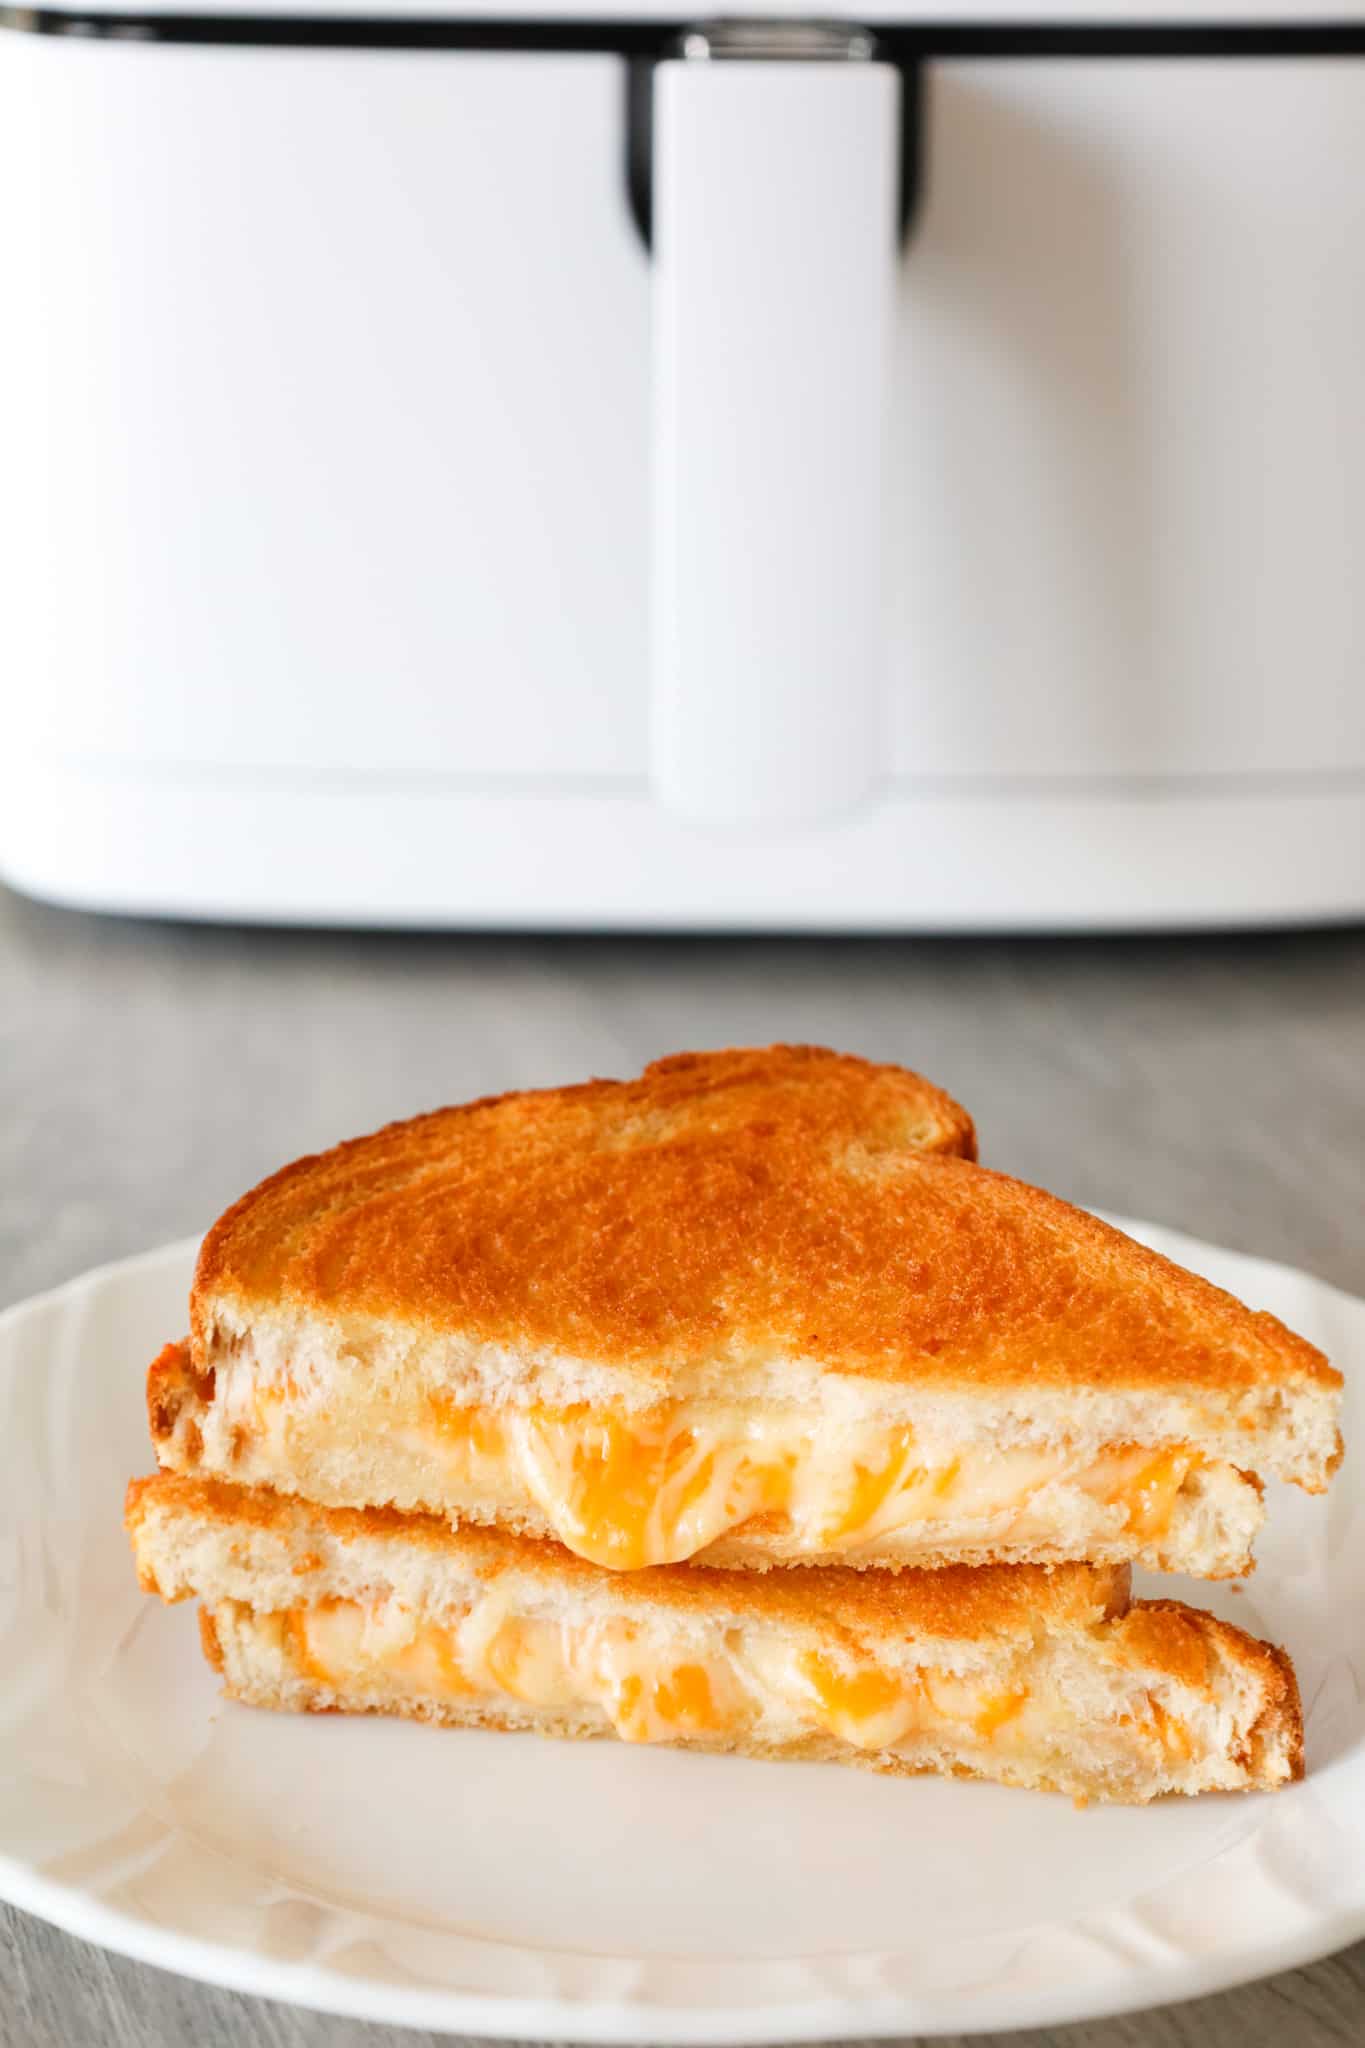 Air Fryer Grilled Cheese is an easy lunch or dinner recipe and results in a crispy sandwich with perfectly melted cheese.